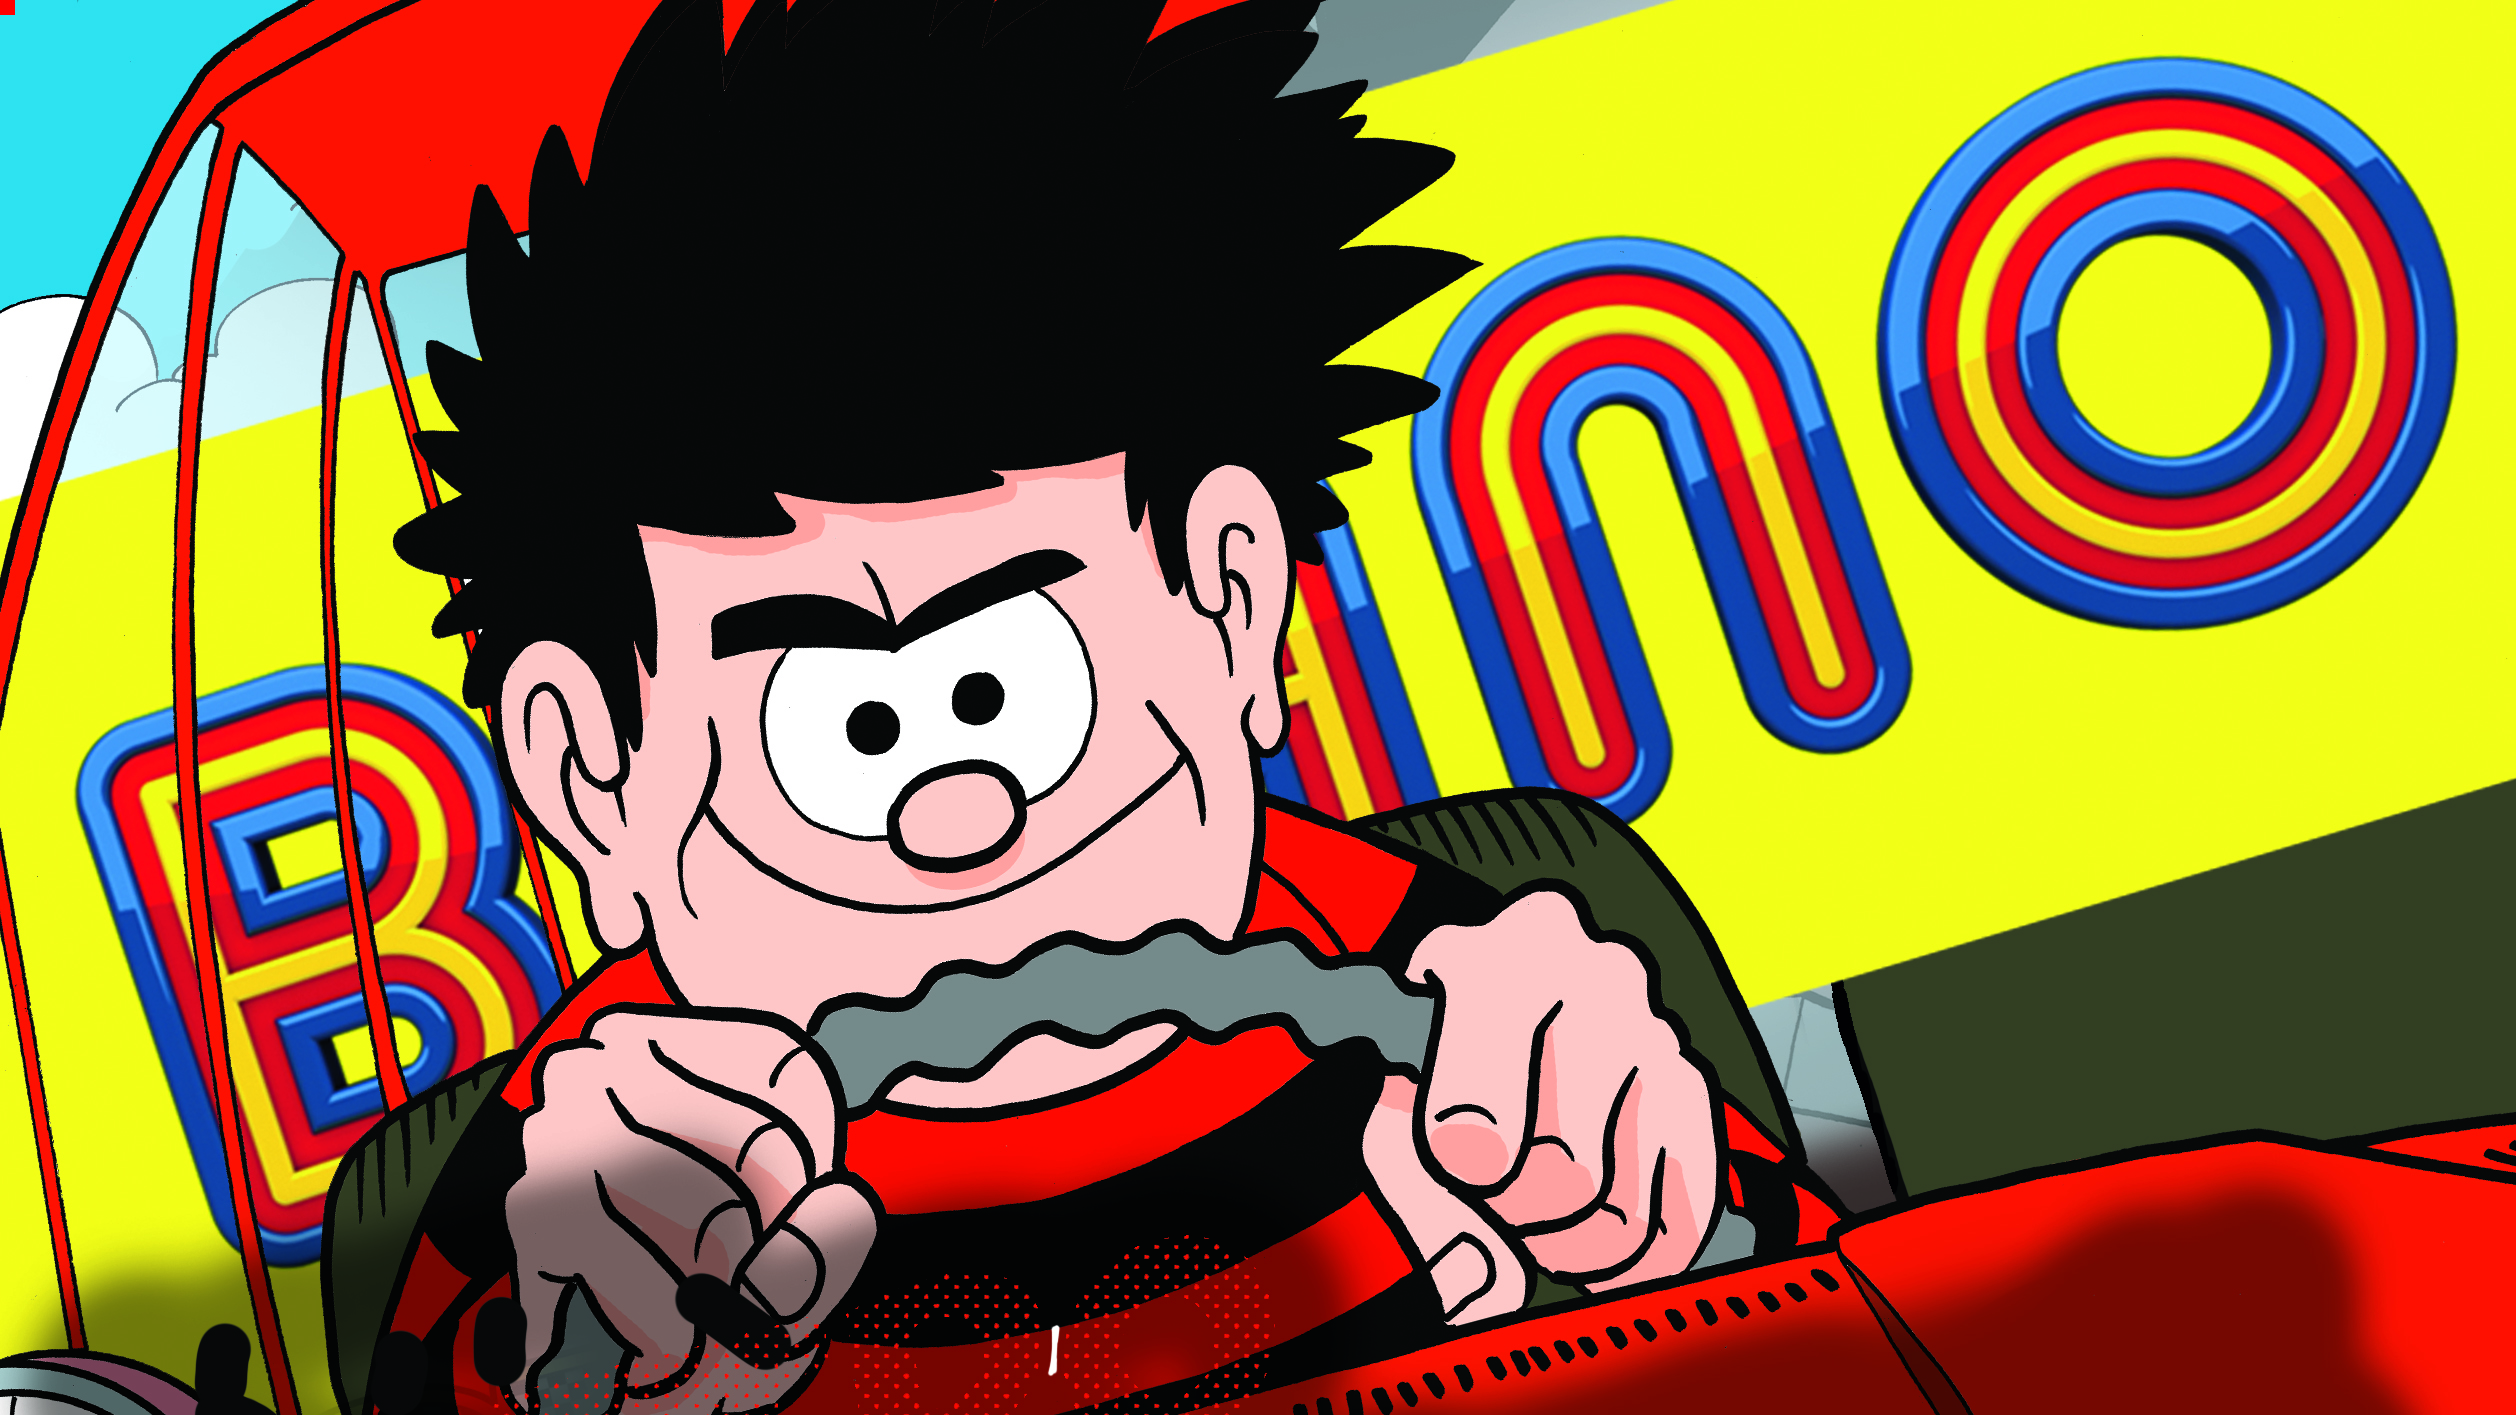 Inside Beano no. 4041 - On your marks, get set... Race!